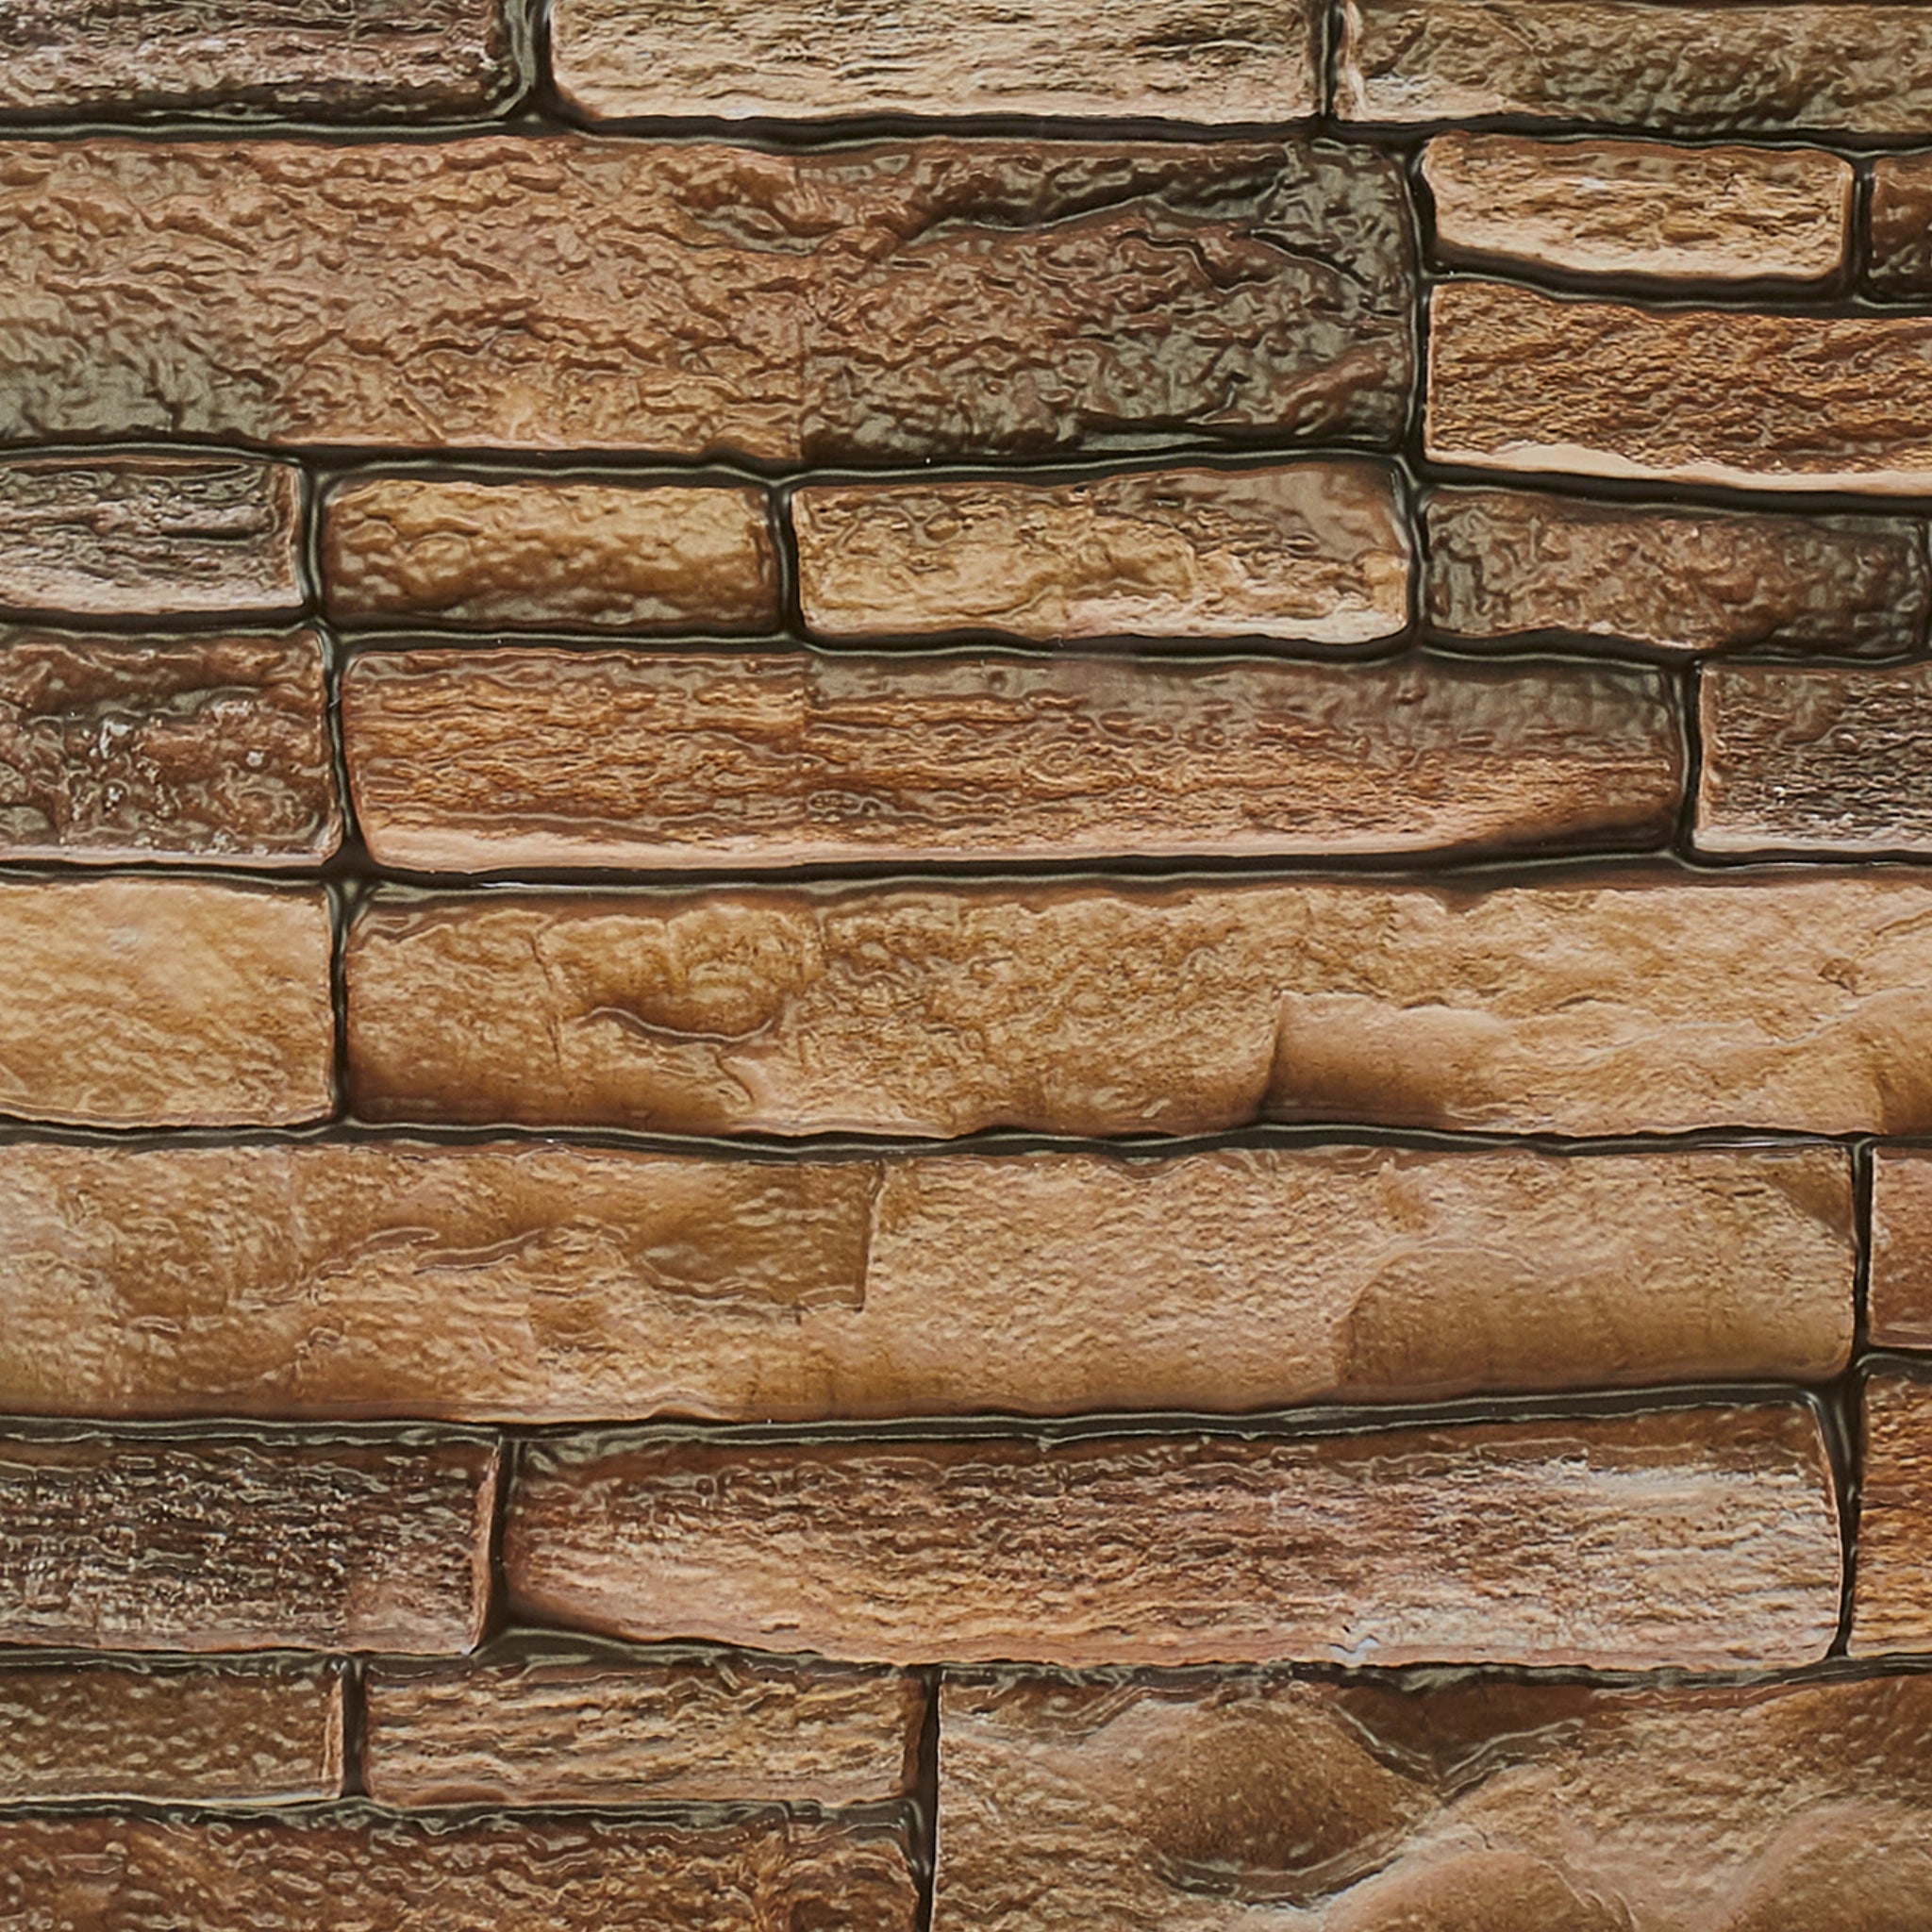 Close-up of rustic tan wall panel with geometric designs